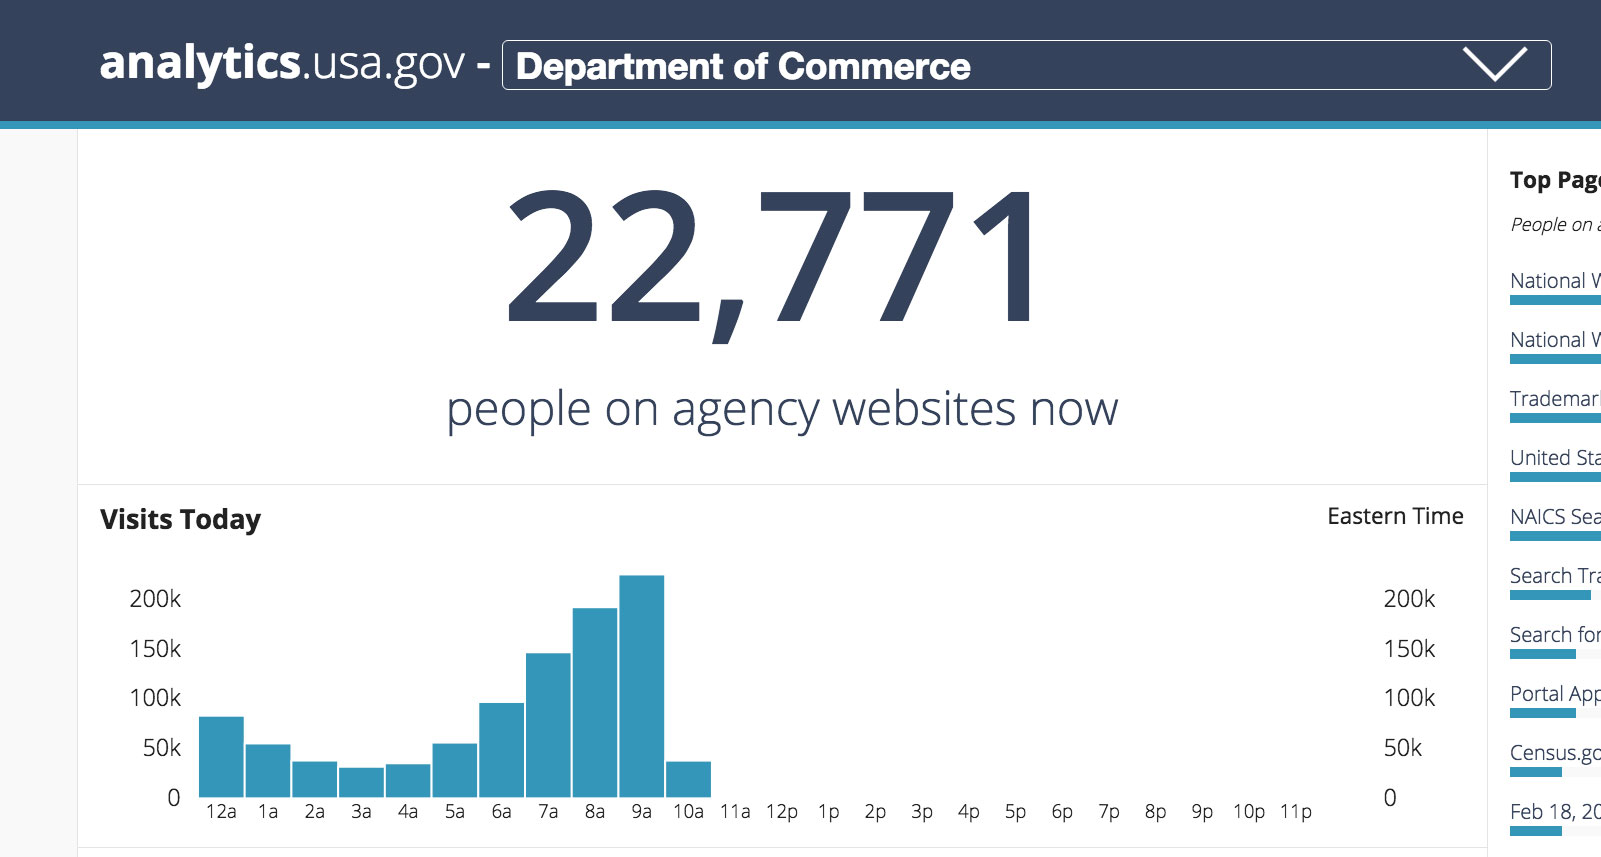 The analytics dashboard for the Department of Commerce